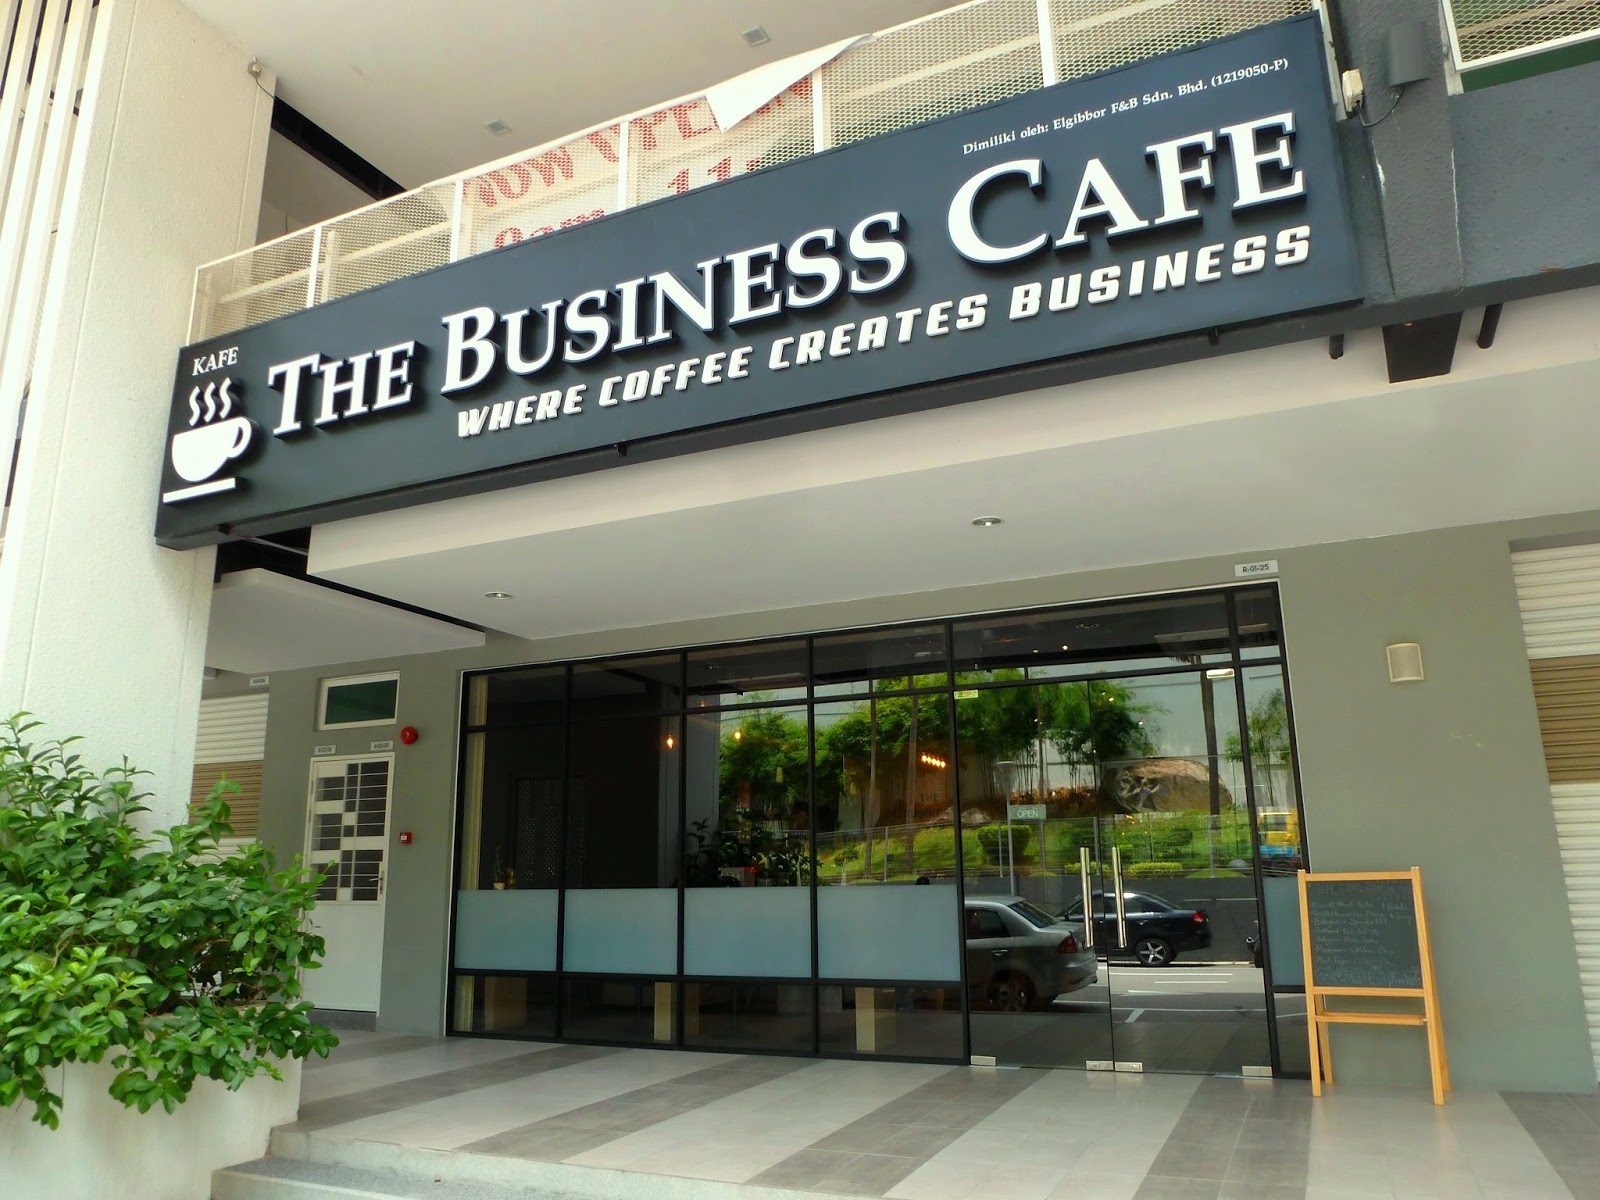 Penang Food For Thought: The Business Cafe